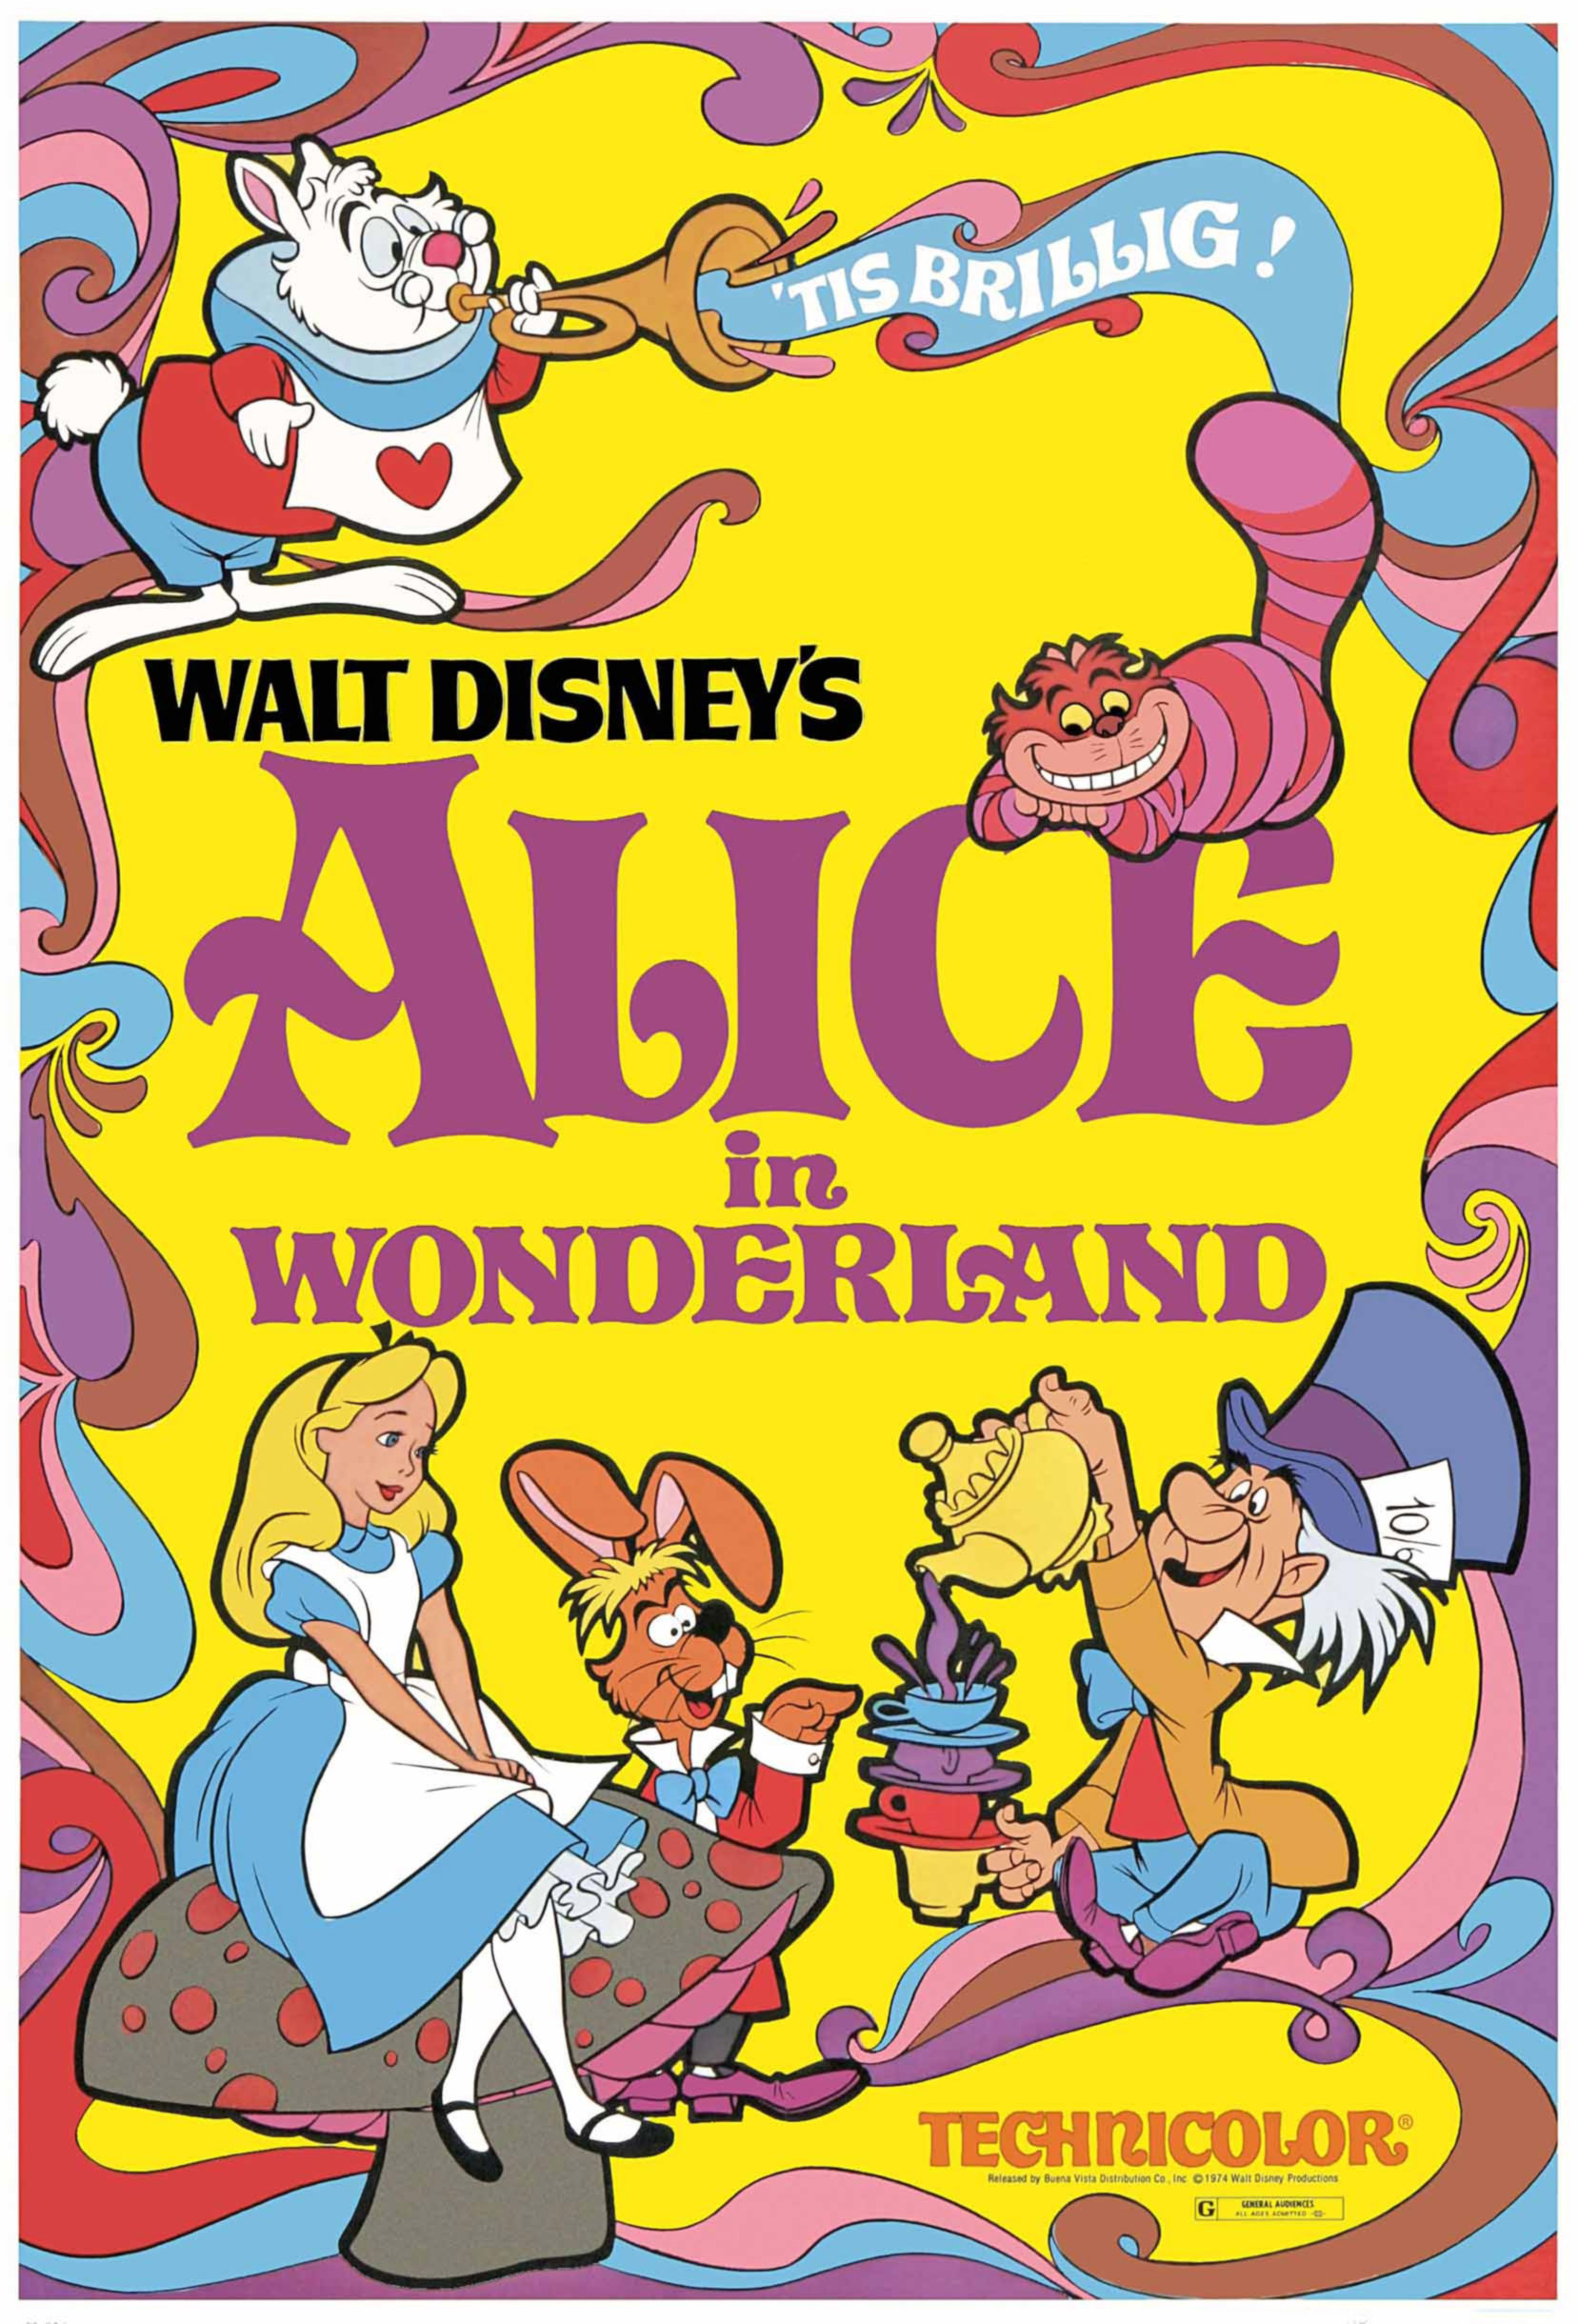 Vintage &quot;Alice in Wonderland&quot; movie poster featuring animated characters Alice, White Rabbit, Cheshire Cat, Mad Hatter, and March Hare